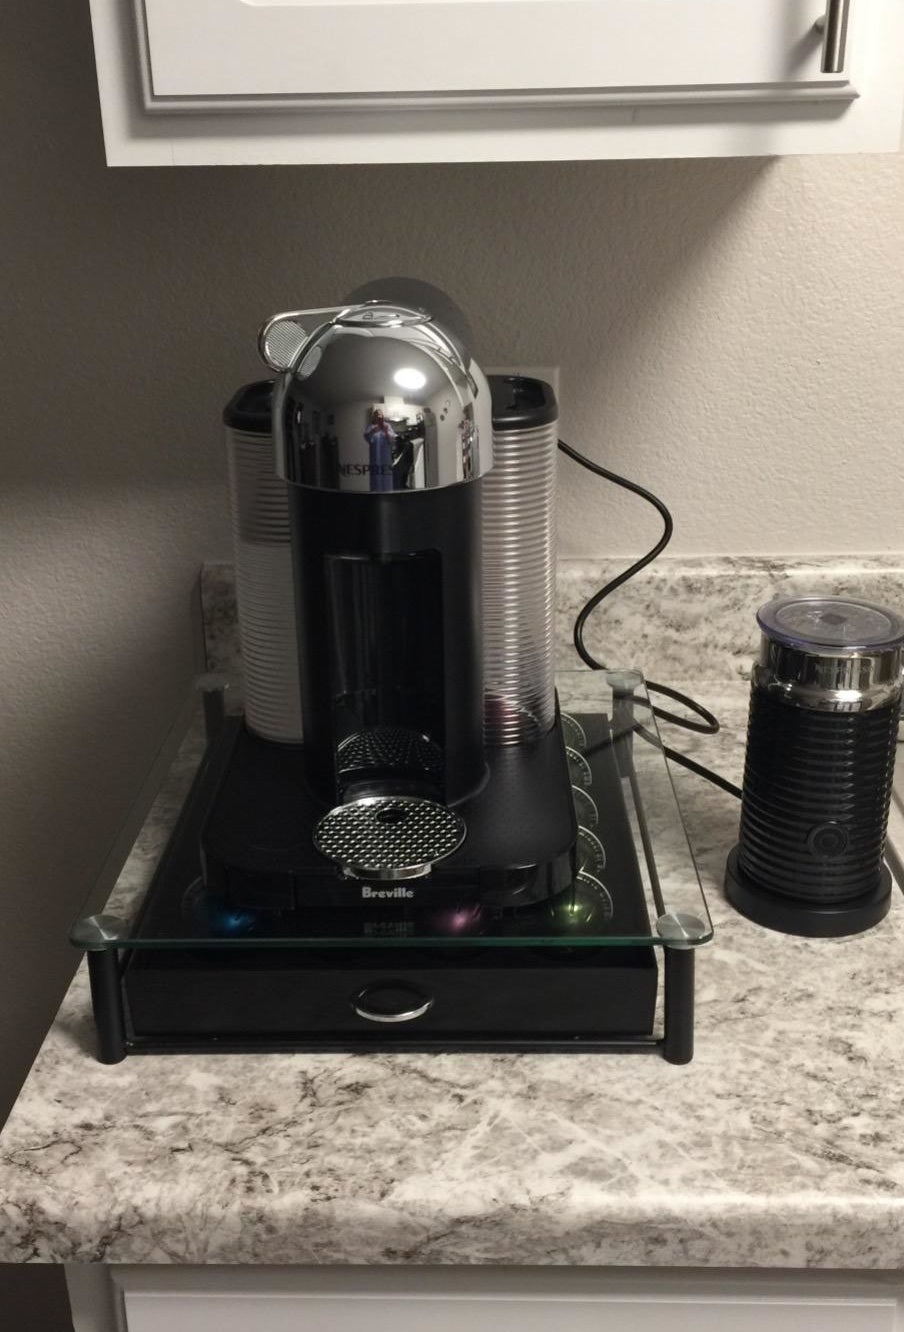 Reviewer pic of the machine, plus the aeroccino milk frother next to it and a drawer of pods under it